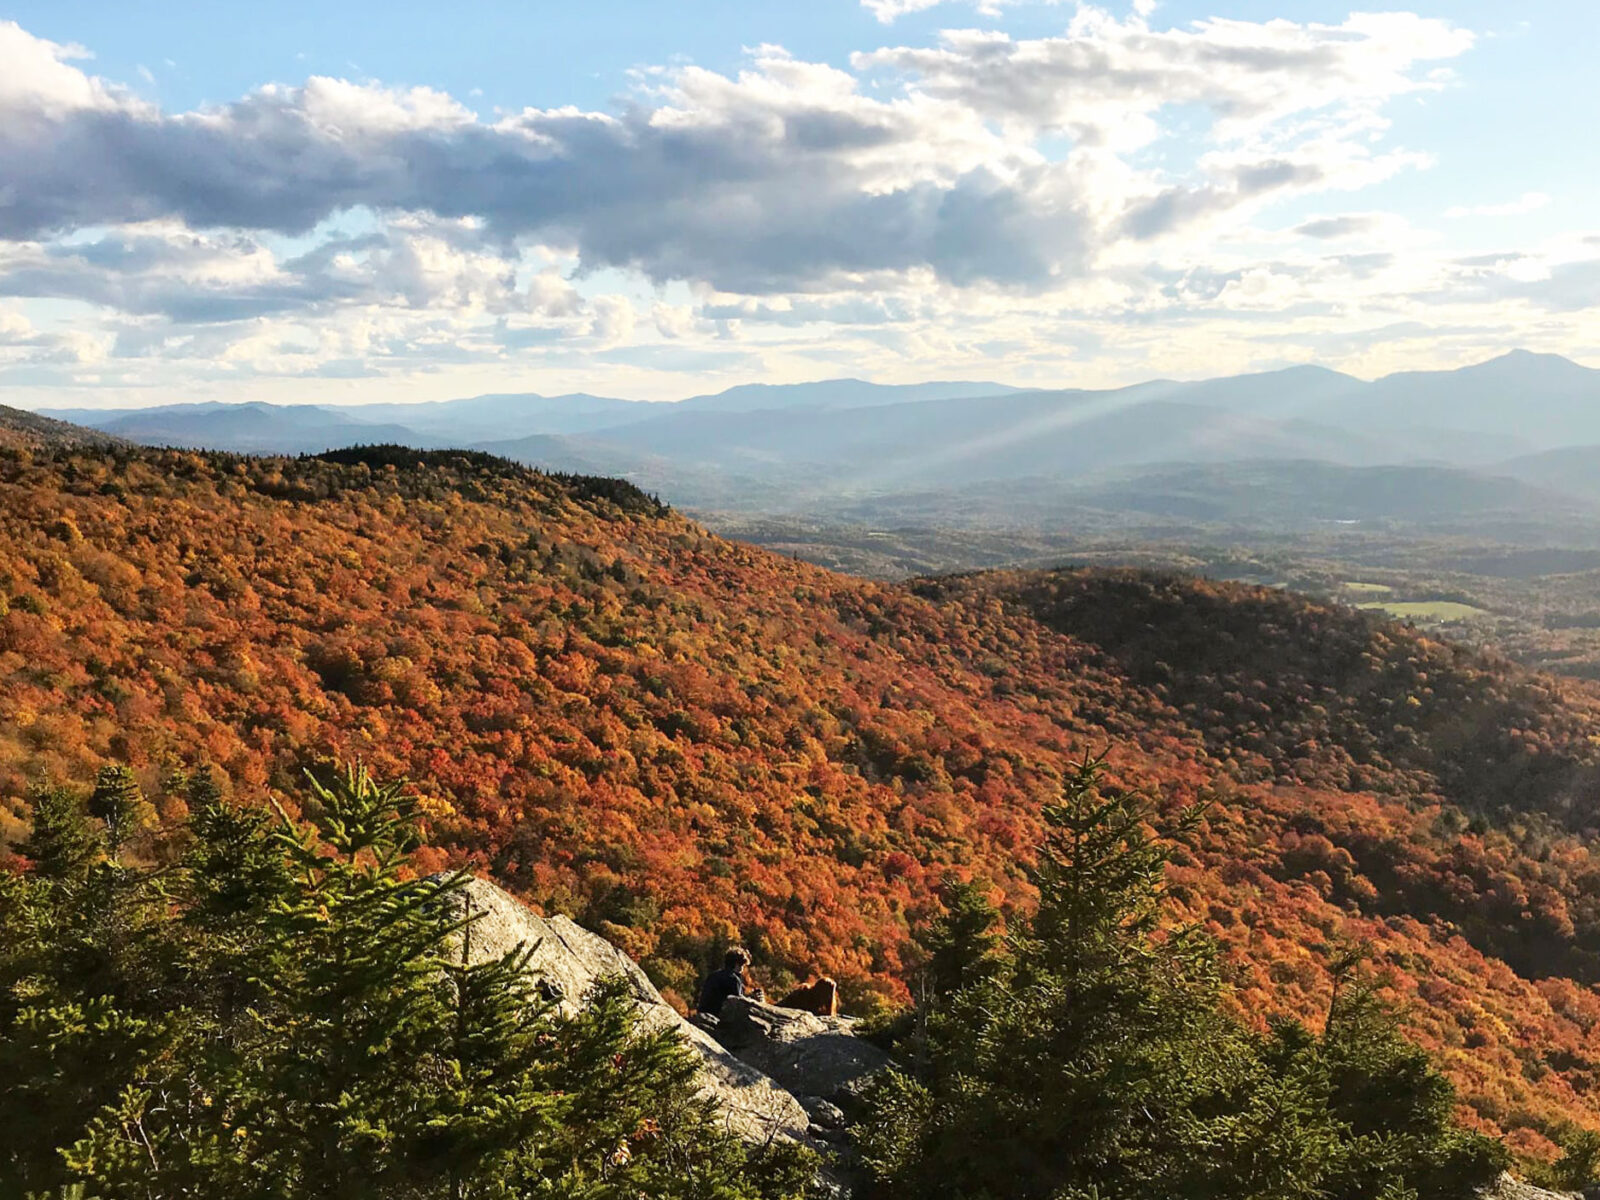 View of fall foliage from the top of a mountain in Vermont.